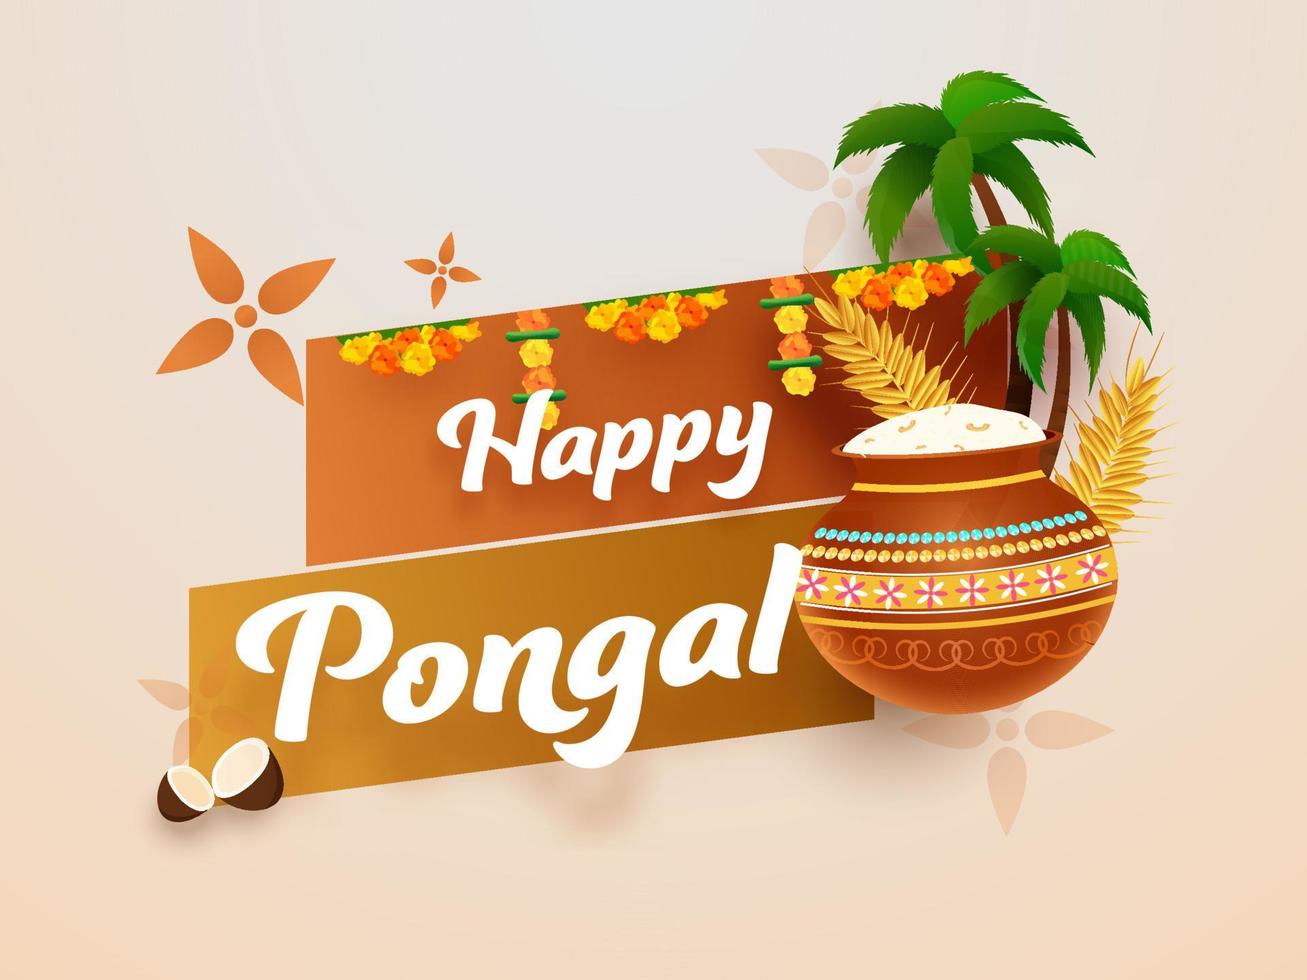 Happy Pongal Font With Pongali Rice Mud Pot, Wheat Ear, Palm Trees ...